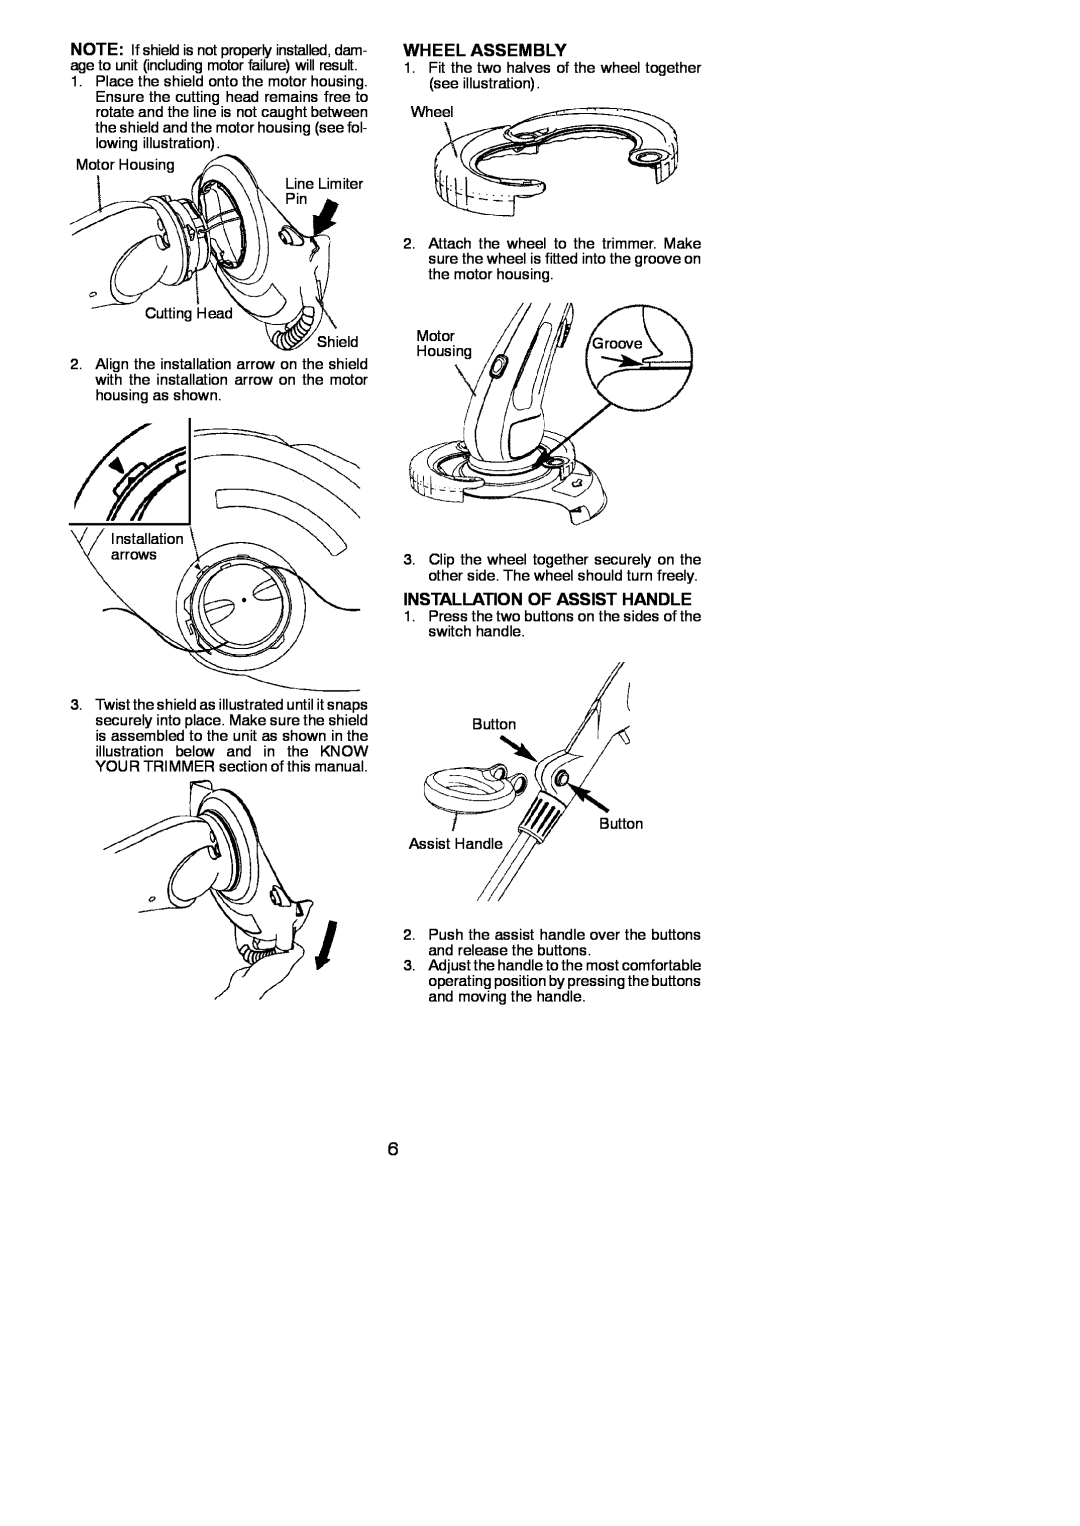 Weed Eater 600, 545186765 instruction manual Wheel Assembly, Installation Of Assist Handle 